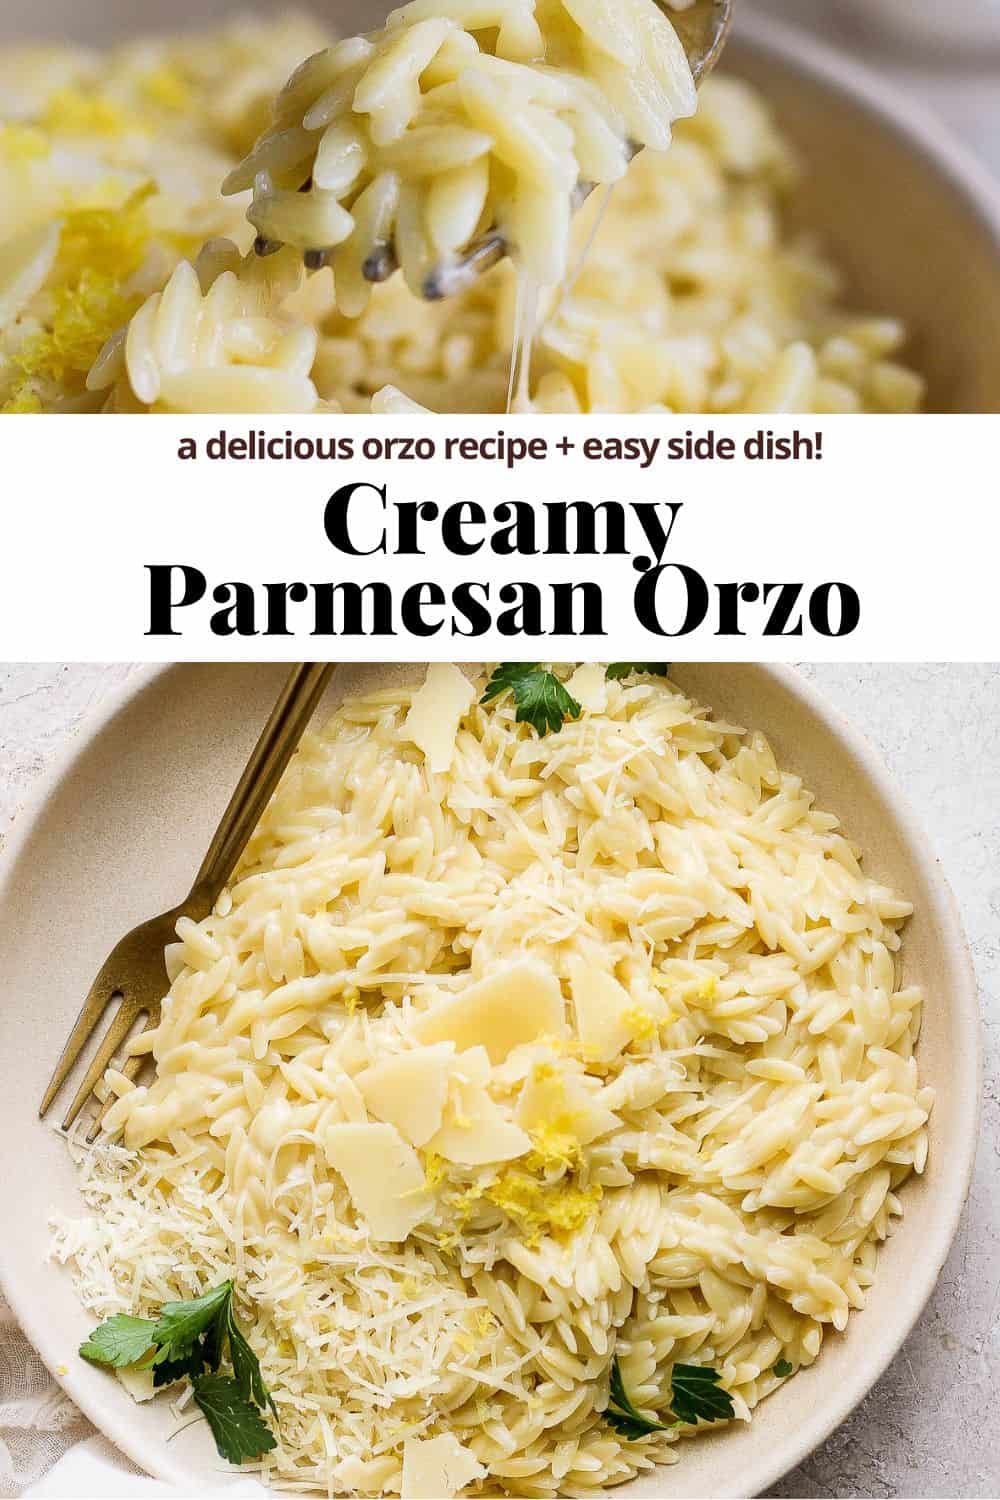 Pinterest image showing parmesan orzo in a plate and in a bowl.